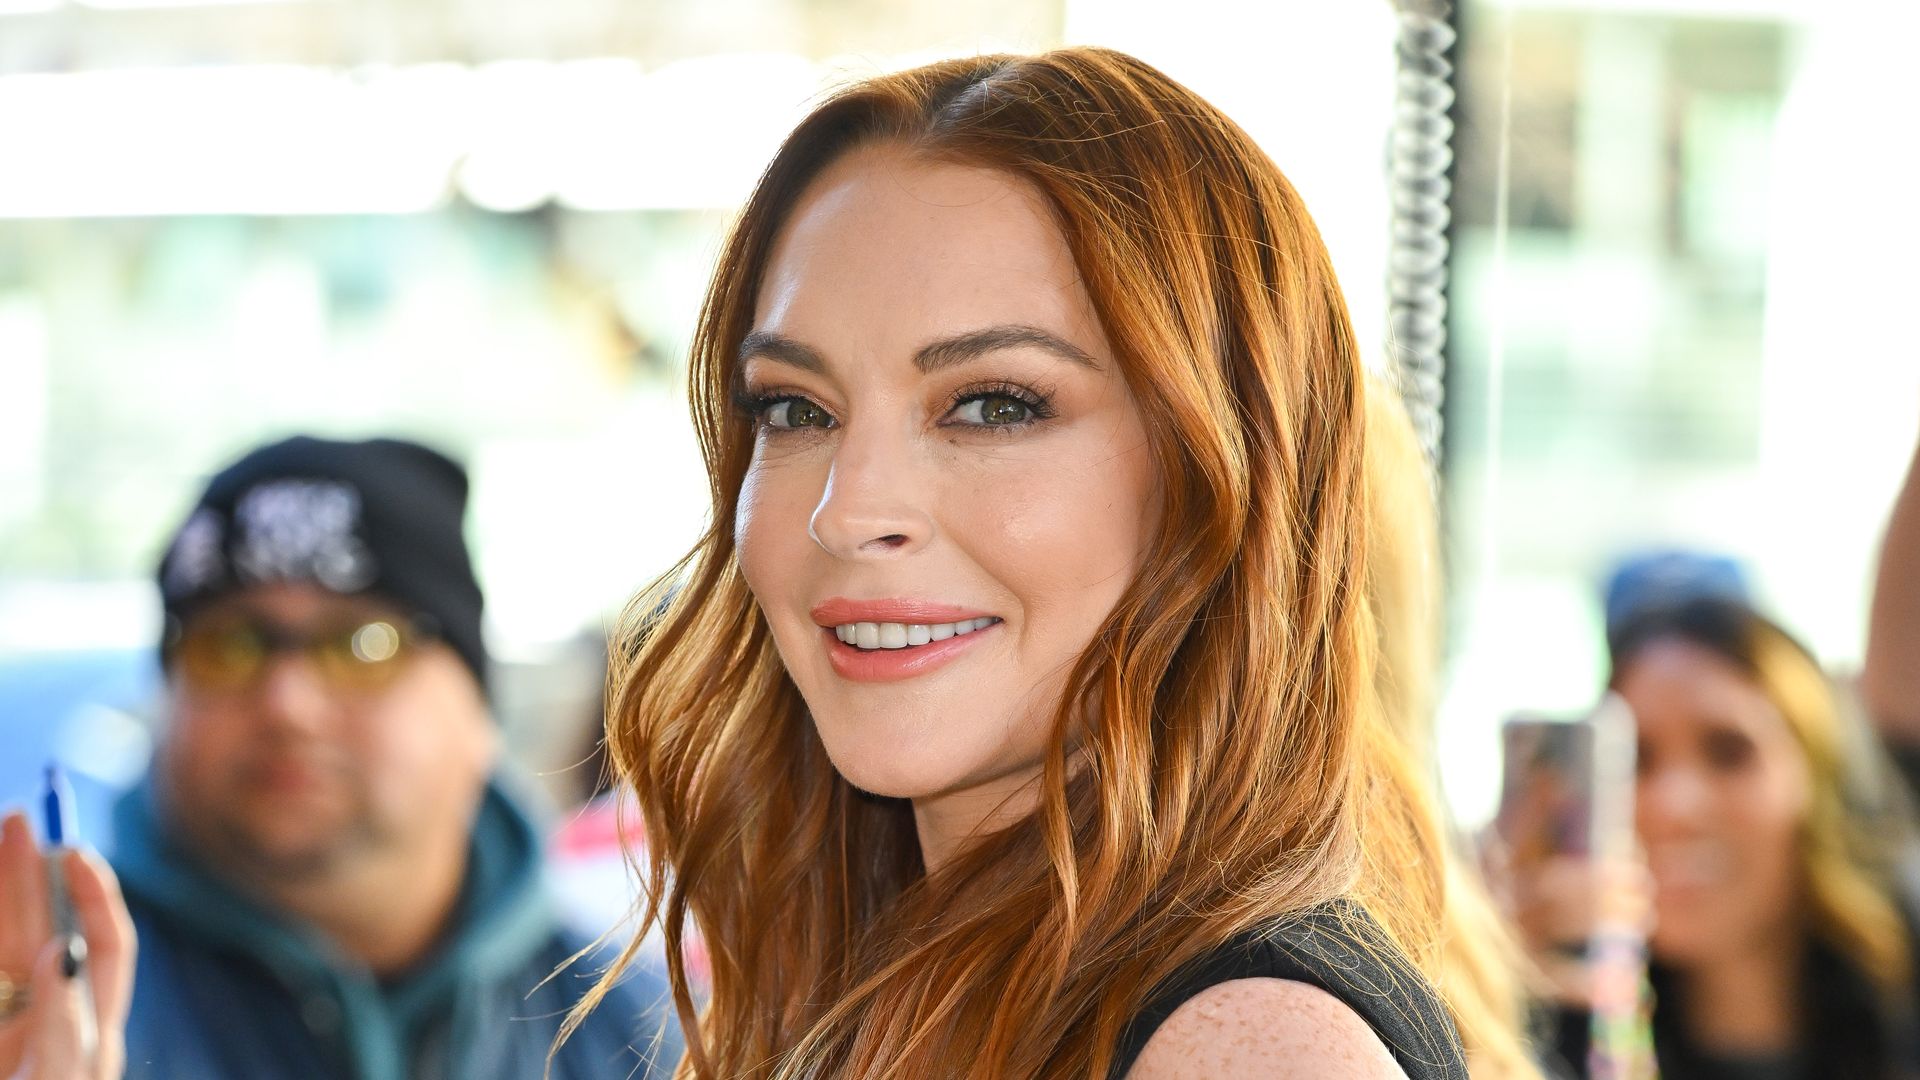 Lindsay Lohan visits "The Drew Barrymore Show" at CBS Broadcast Center on November 10, 2022 in New York City